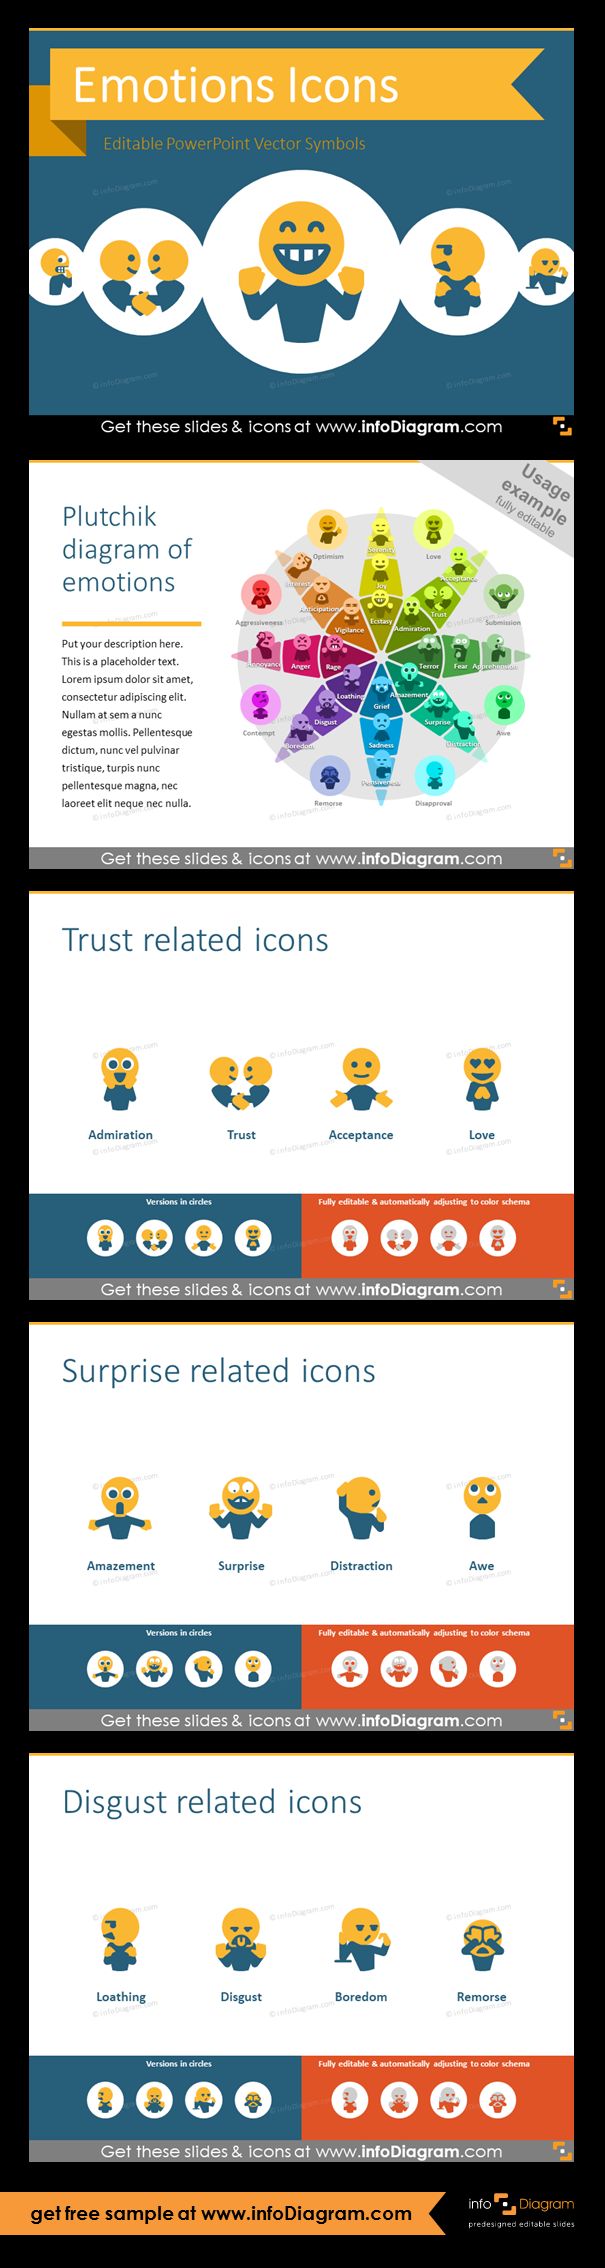 Psychology-Infographic-Emotions-and-Feelings-Icons-flat-PPT-clipart Psychology Infographic : Emotions and Feelings Icons (flat PPT clipart)